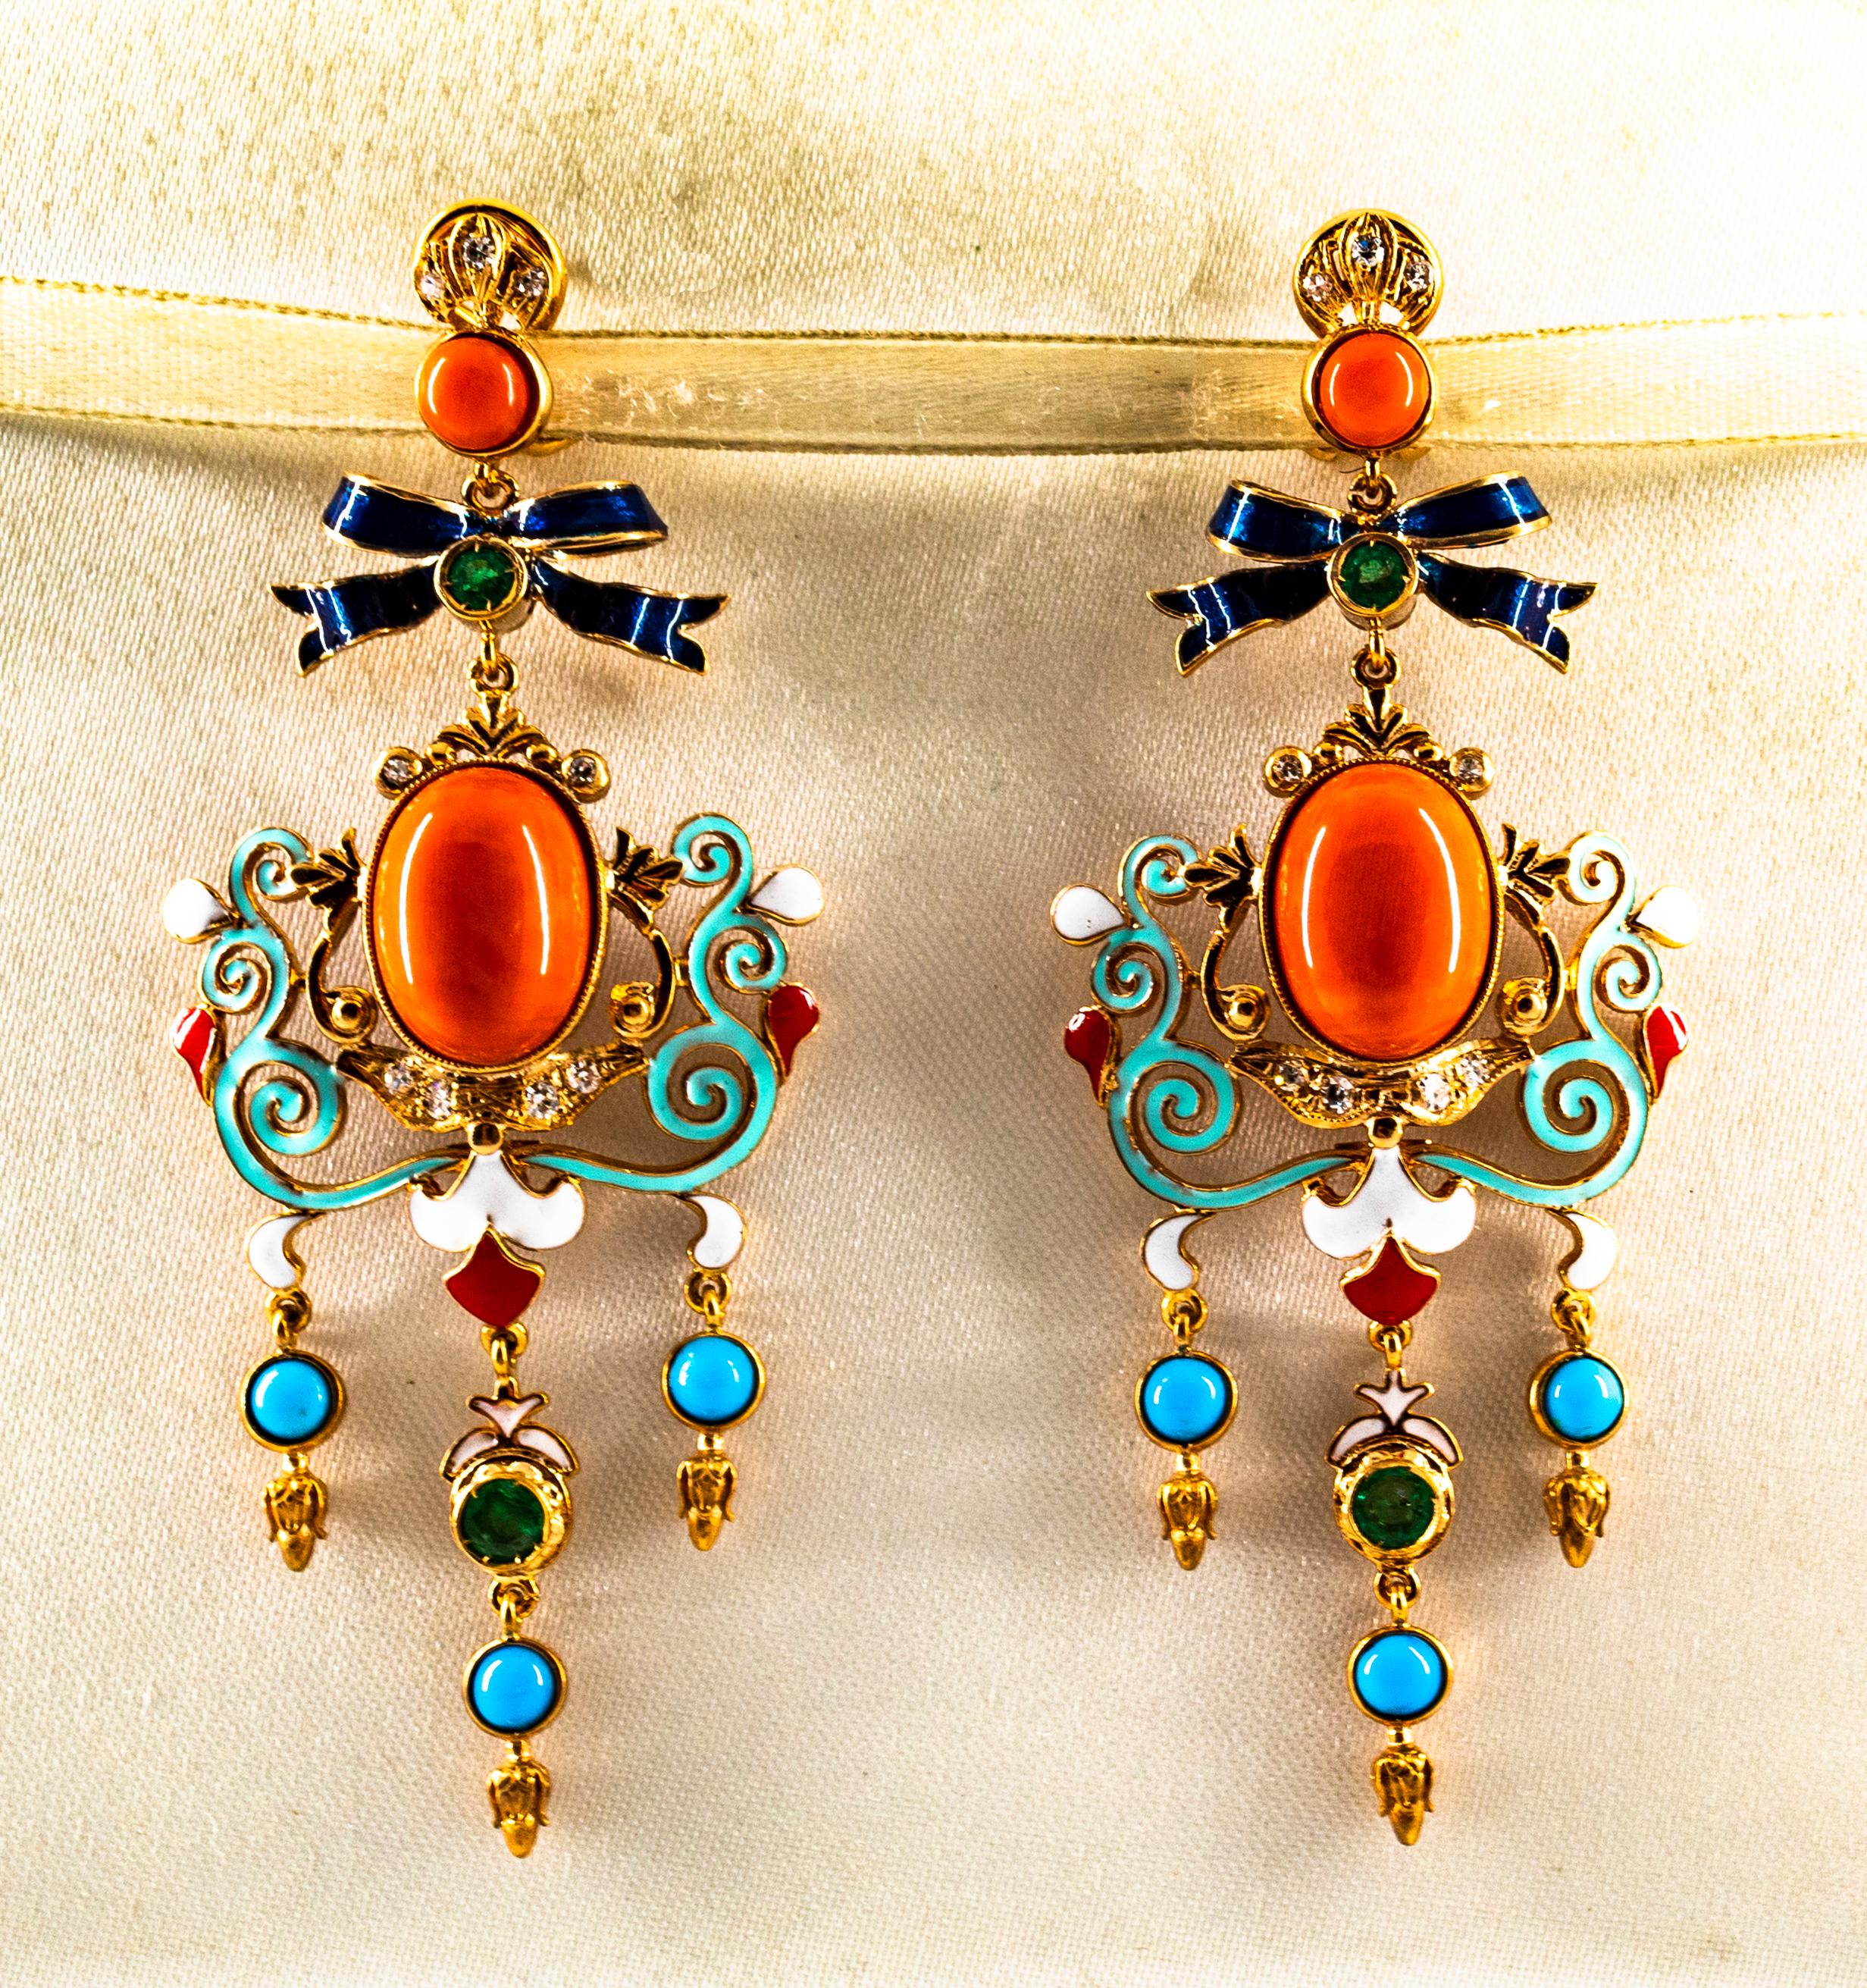 These Earrings are made of 9K Yellow Gold.
These Earrings have  0.30 Carats of White Modern Round Cut Diamonds.
These Earrings have 0.50 Carats of Emeralds.
These Earrings have Mediterranean (Sardinia, Italy) Red Coral and Turquoise.
These Earrings